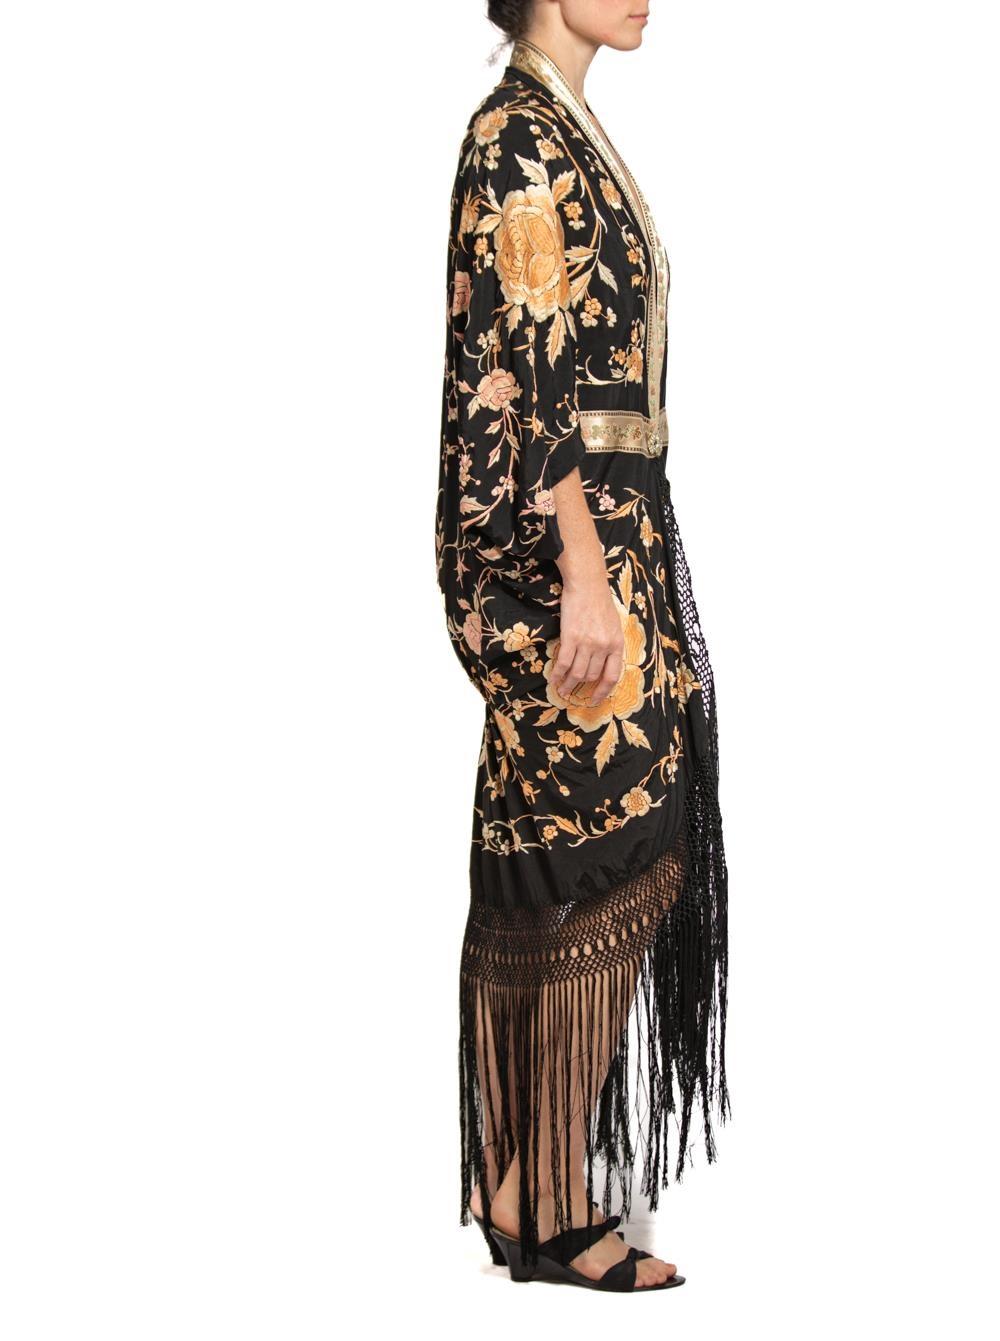 MORPHEW COLLECTION Black & Champagne Silk Floral Hand Embroidered Piano Shawl   In Excellent Condition For Sale In New York, NY